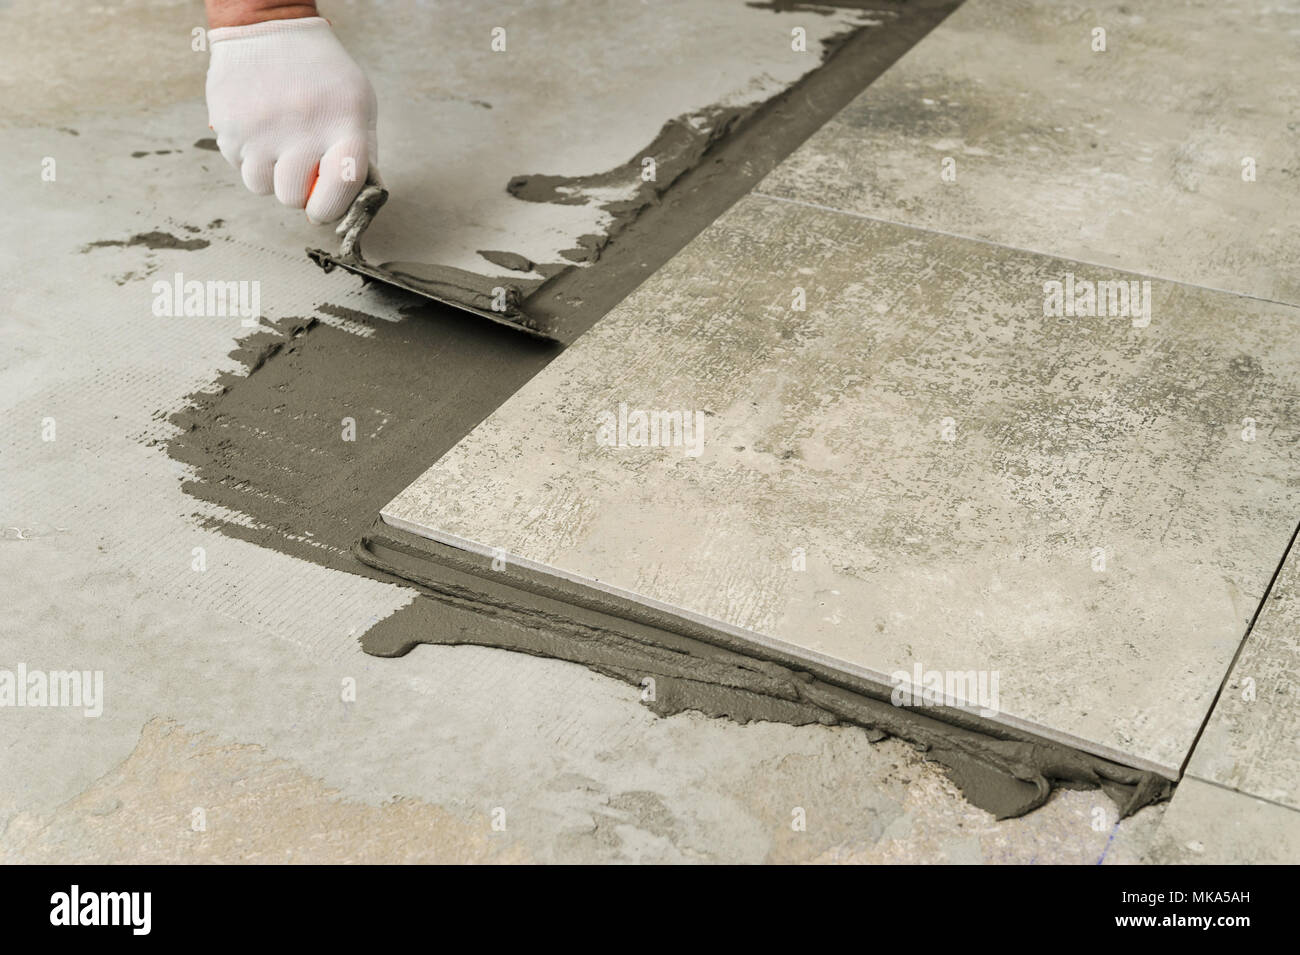 Laying Ceramic Tiles Troweling Mortar Onto A Concrete Floor In